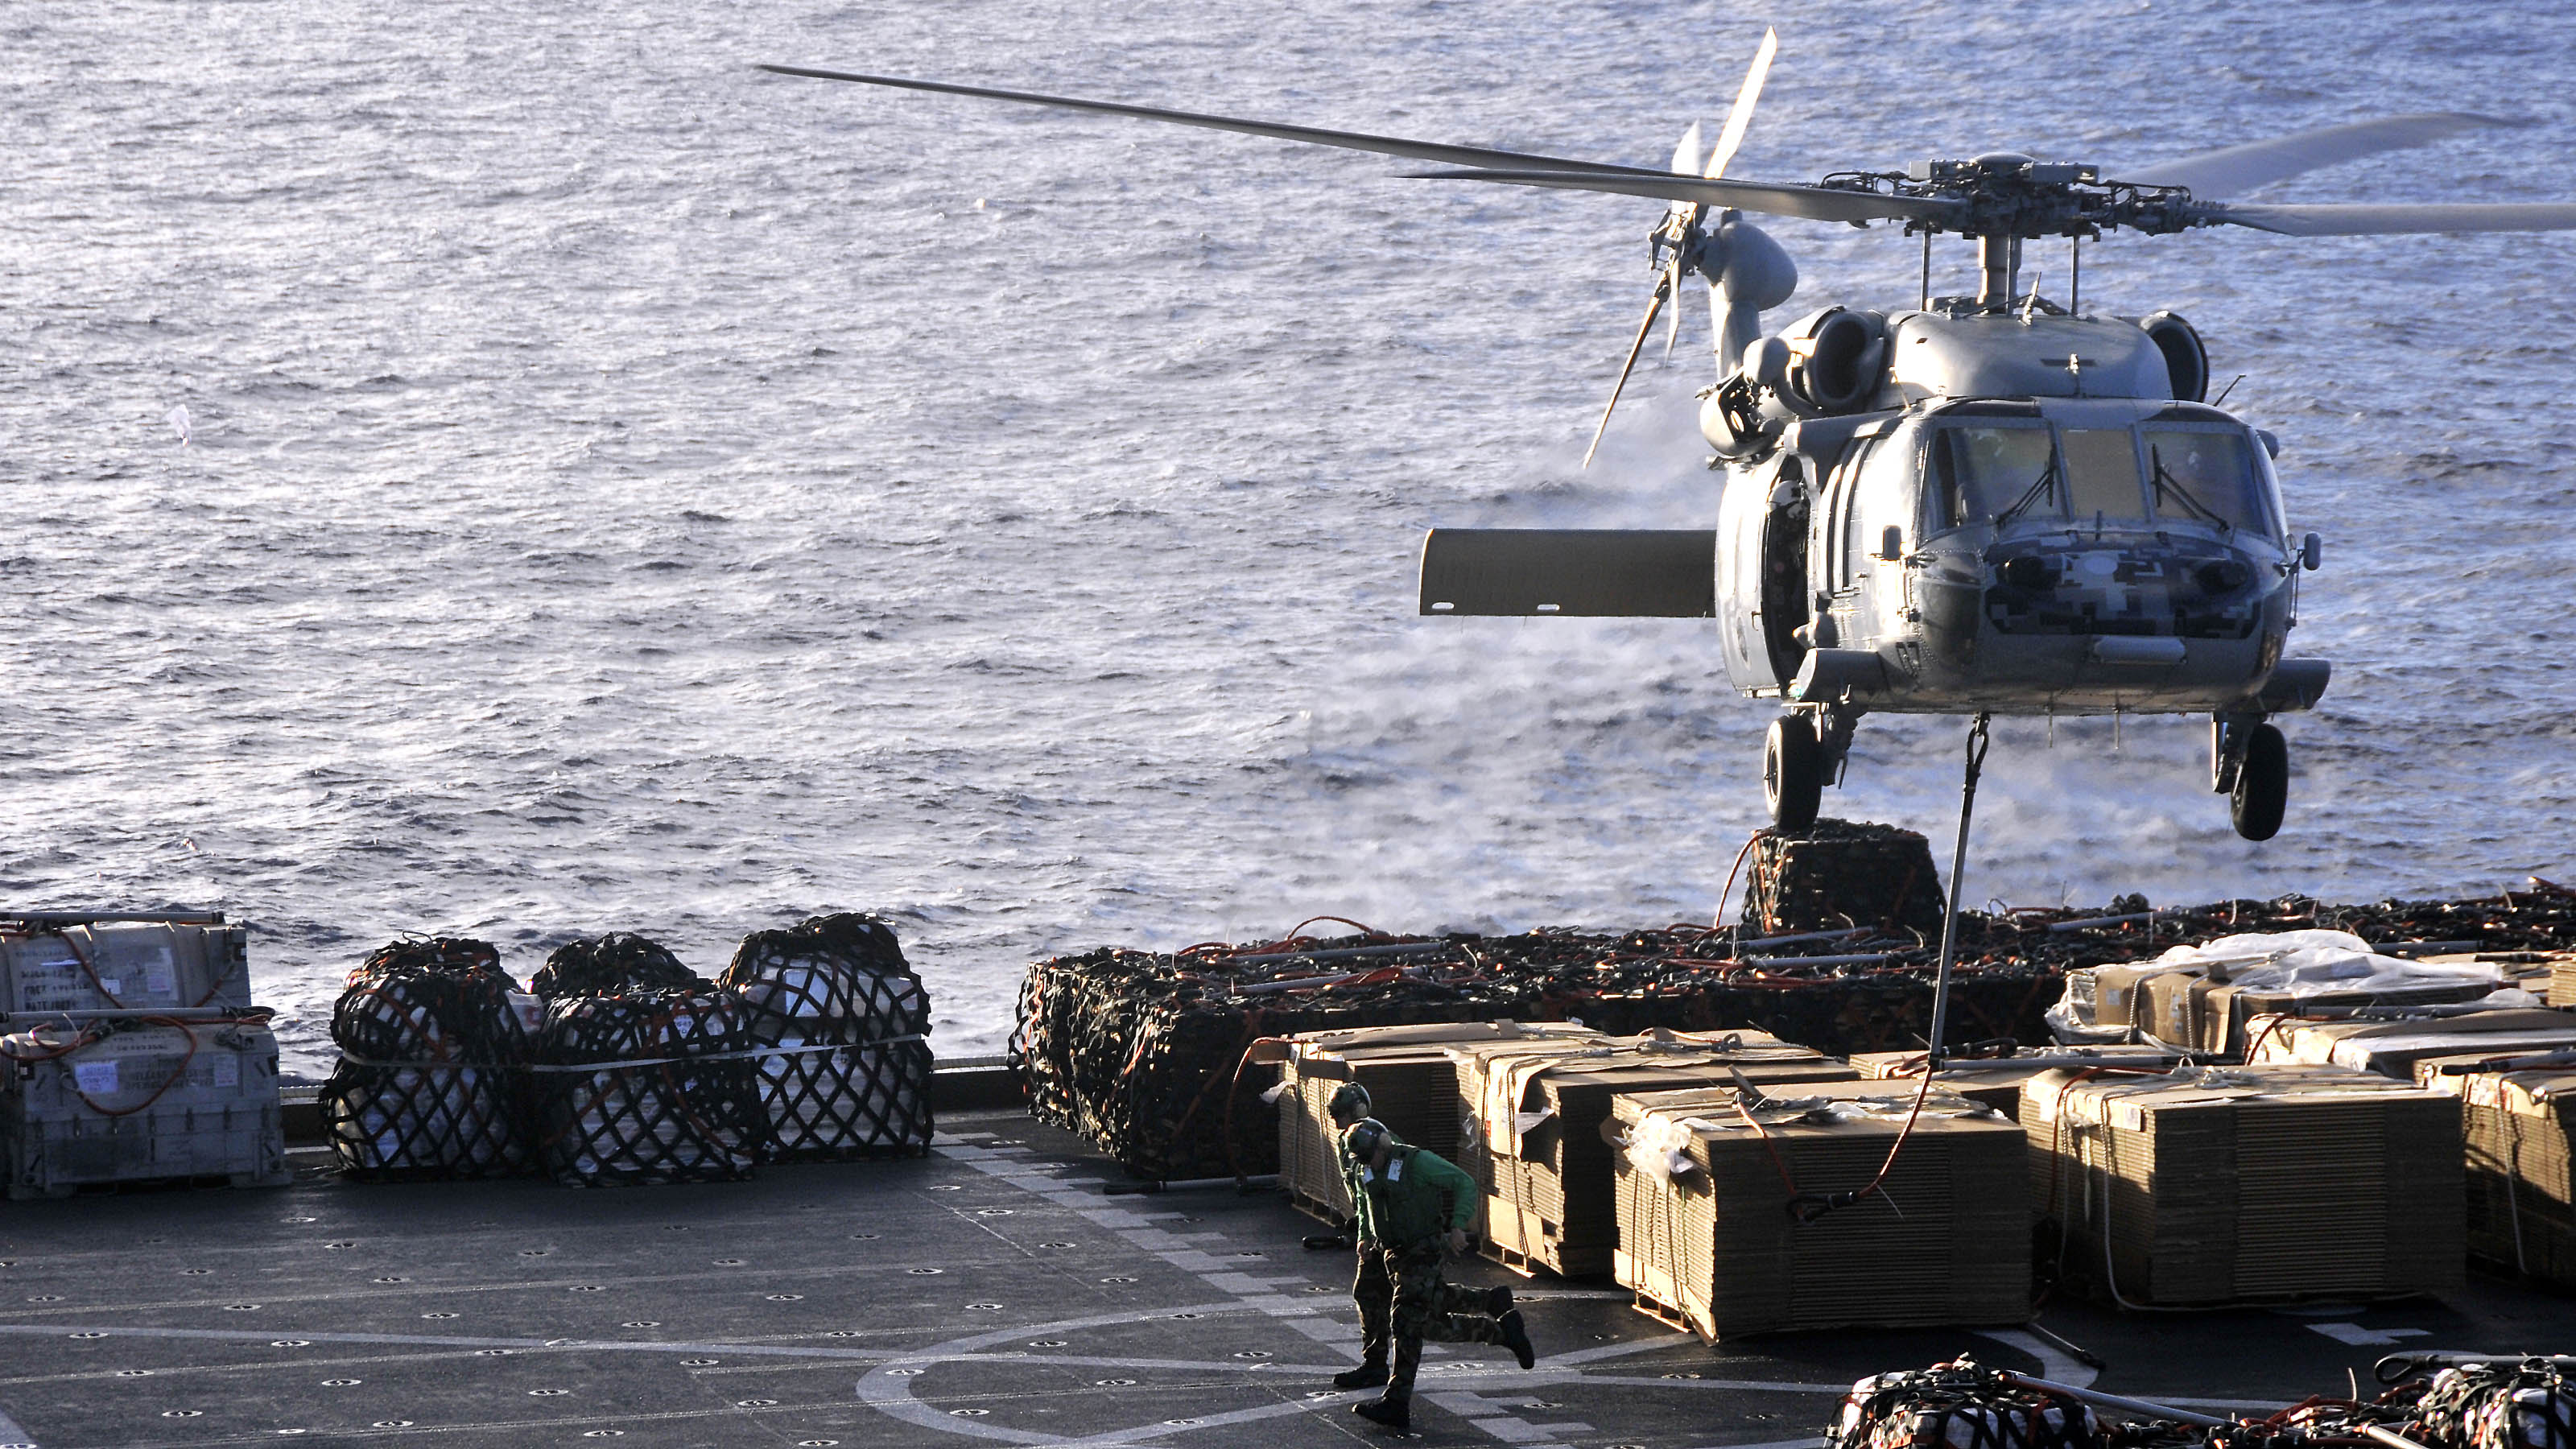 US Navy 101025-N-7103C-076 An MH-60S Sea Hawk helicopter assigned to the Island Knights of Helicopter Sea Combat Squadron (HSC) 25 lifts cargo from